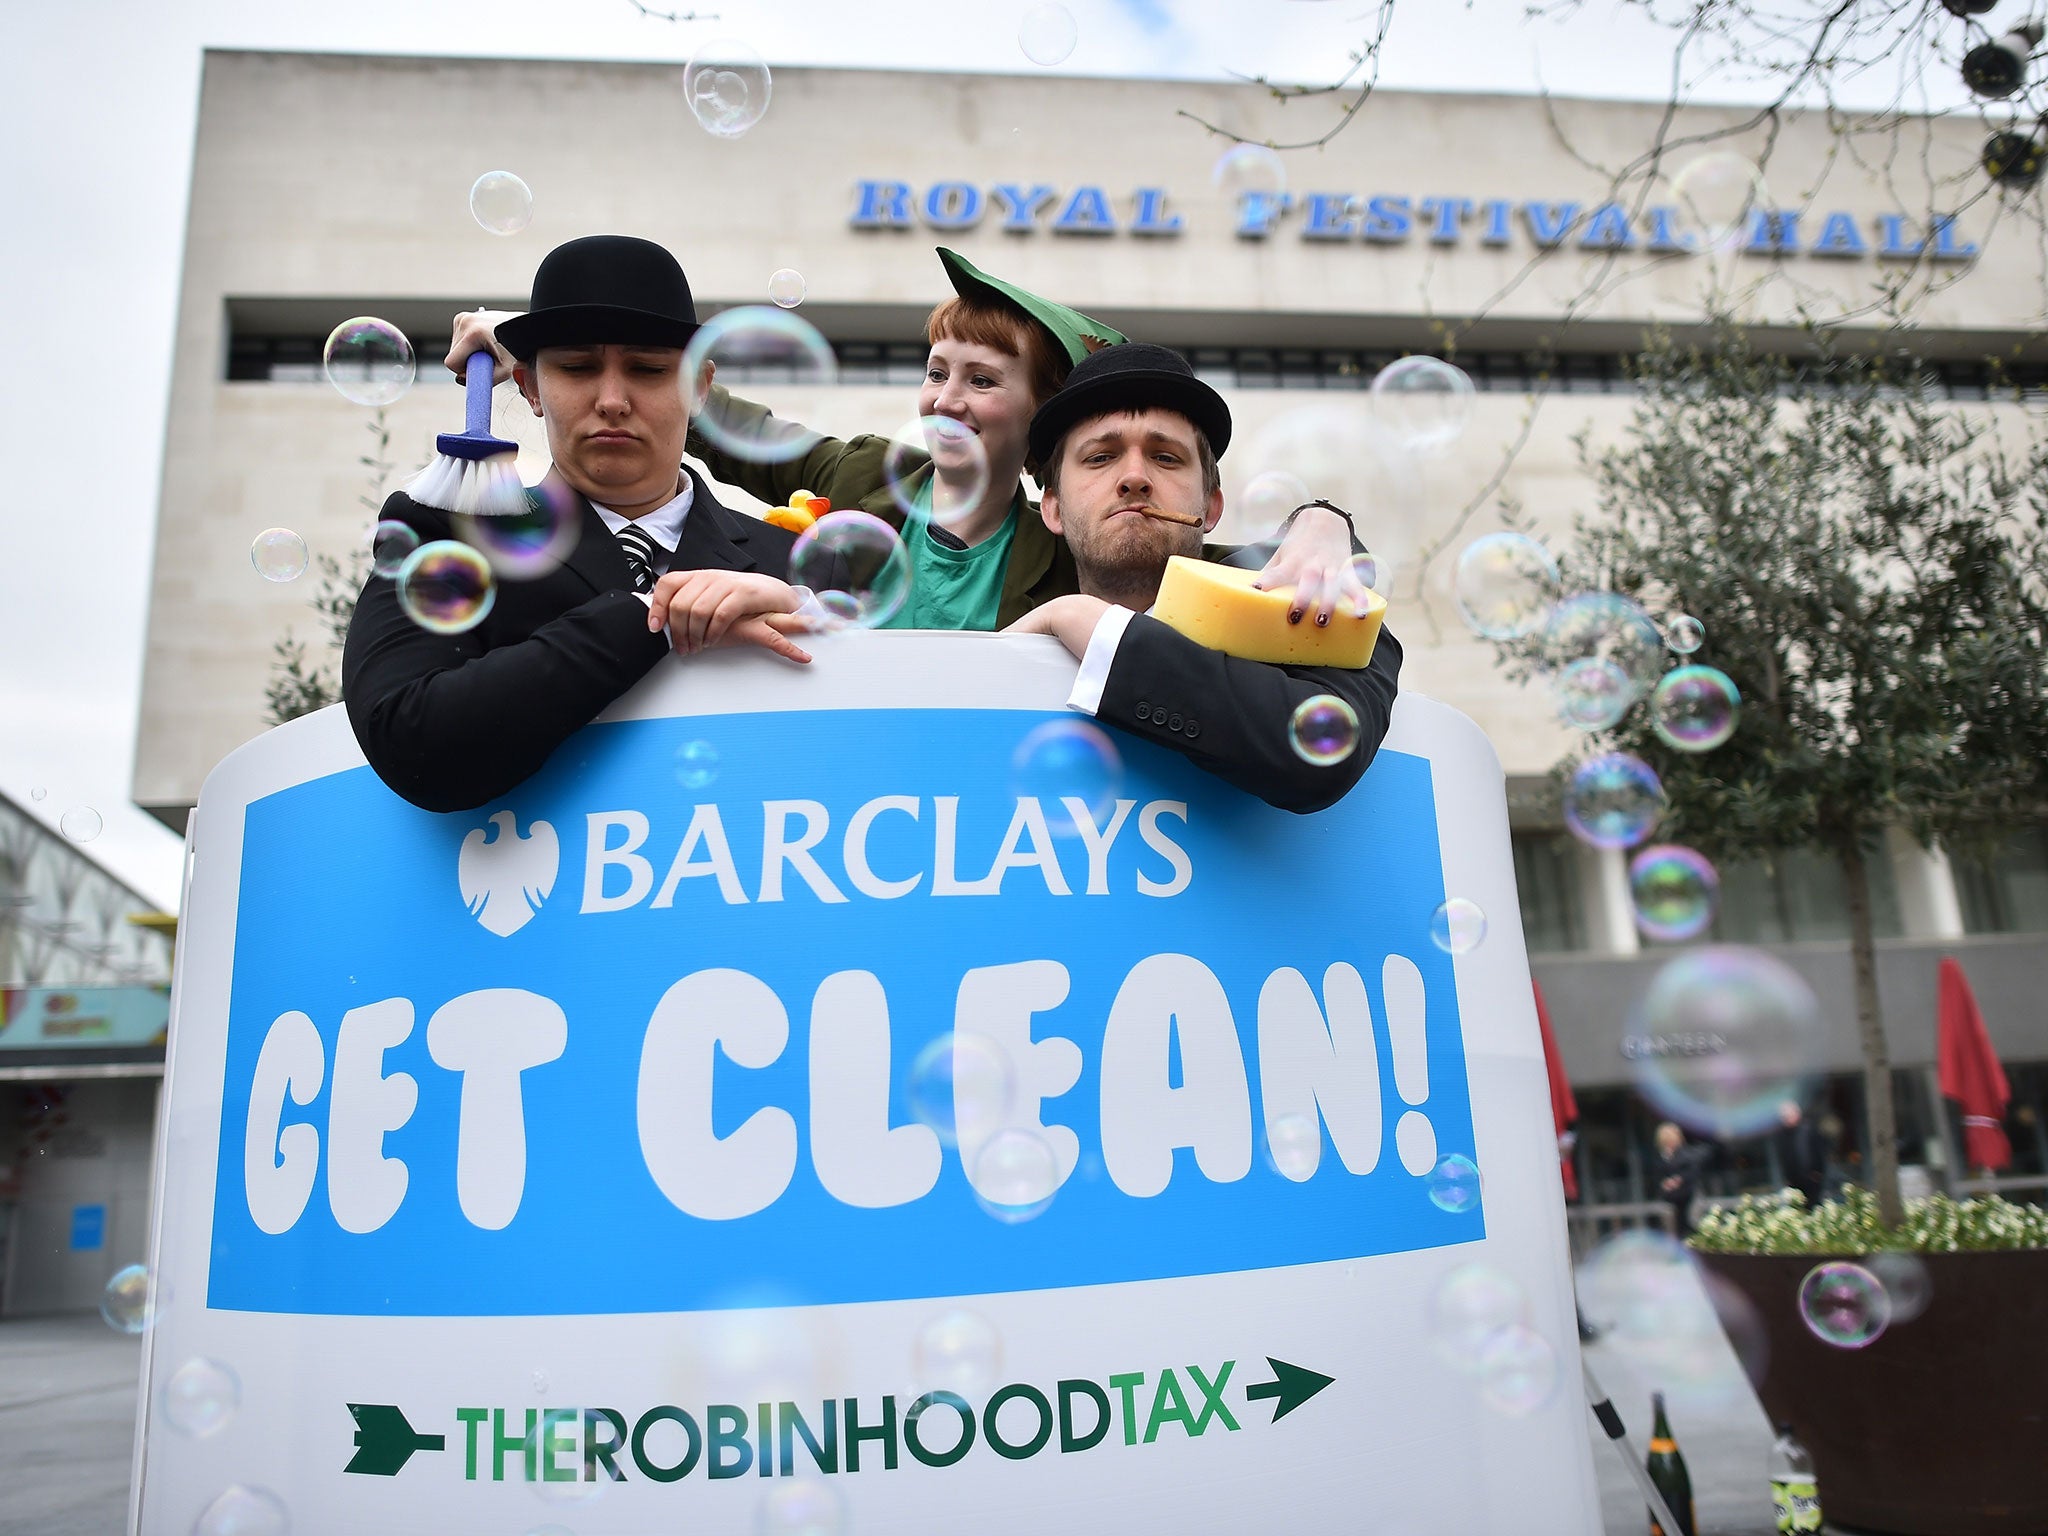 ‘Pragmatic’ reforms may not be enough for the tax campaigners who protested outside Barclays’ AGM